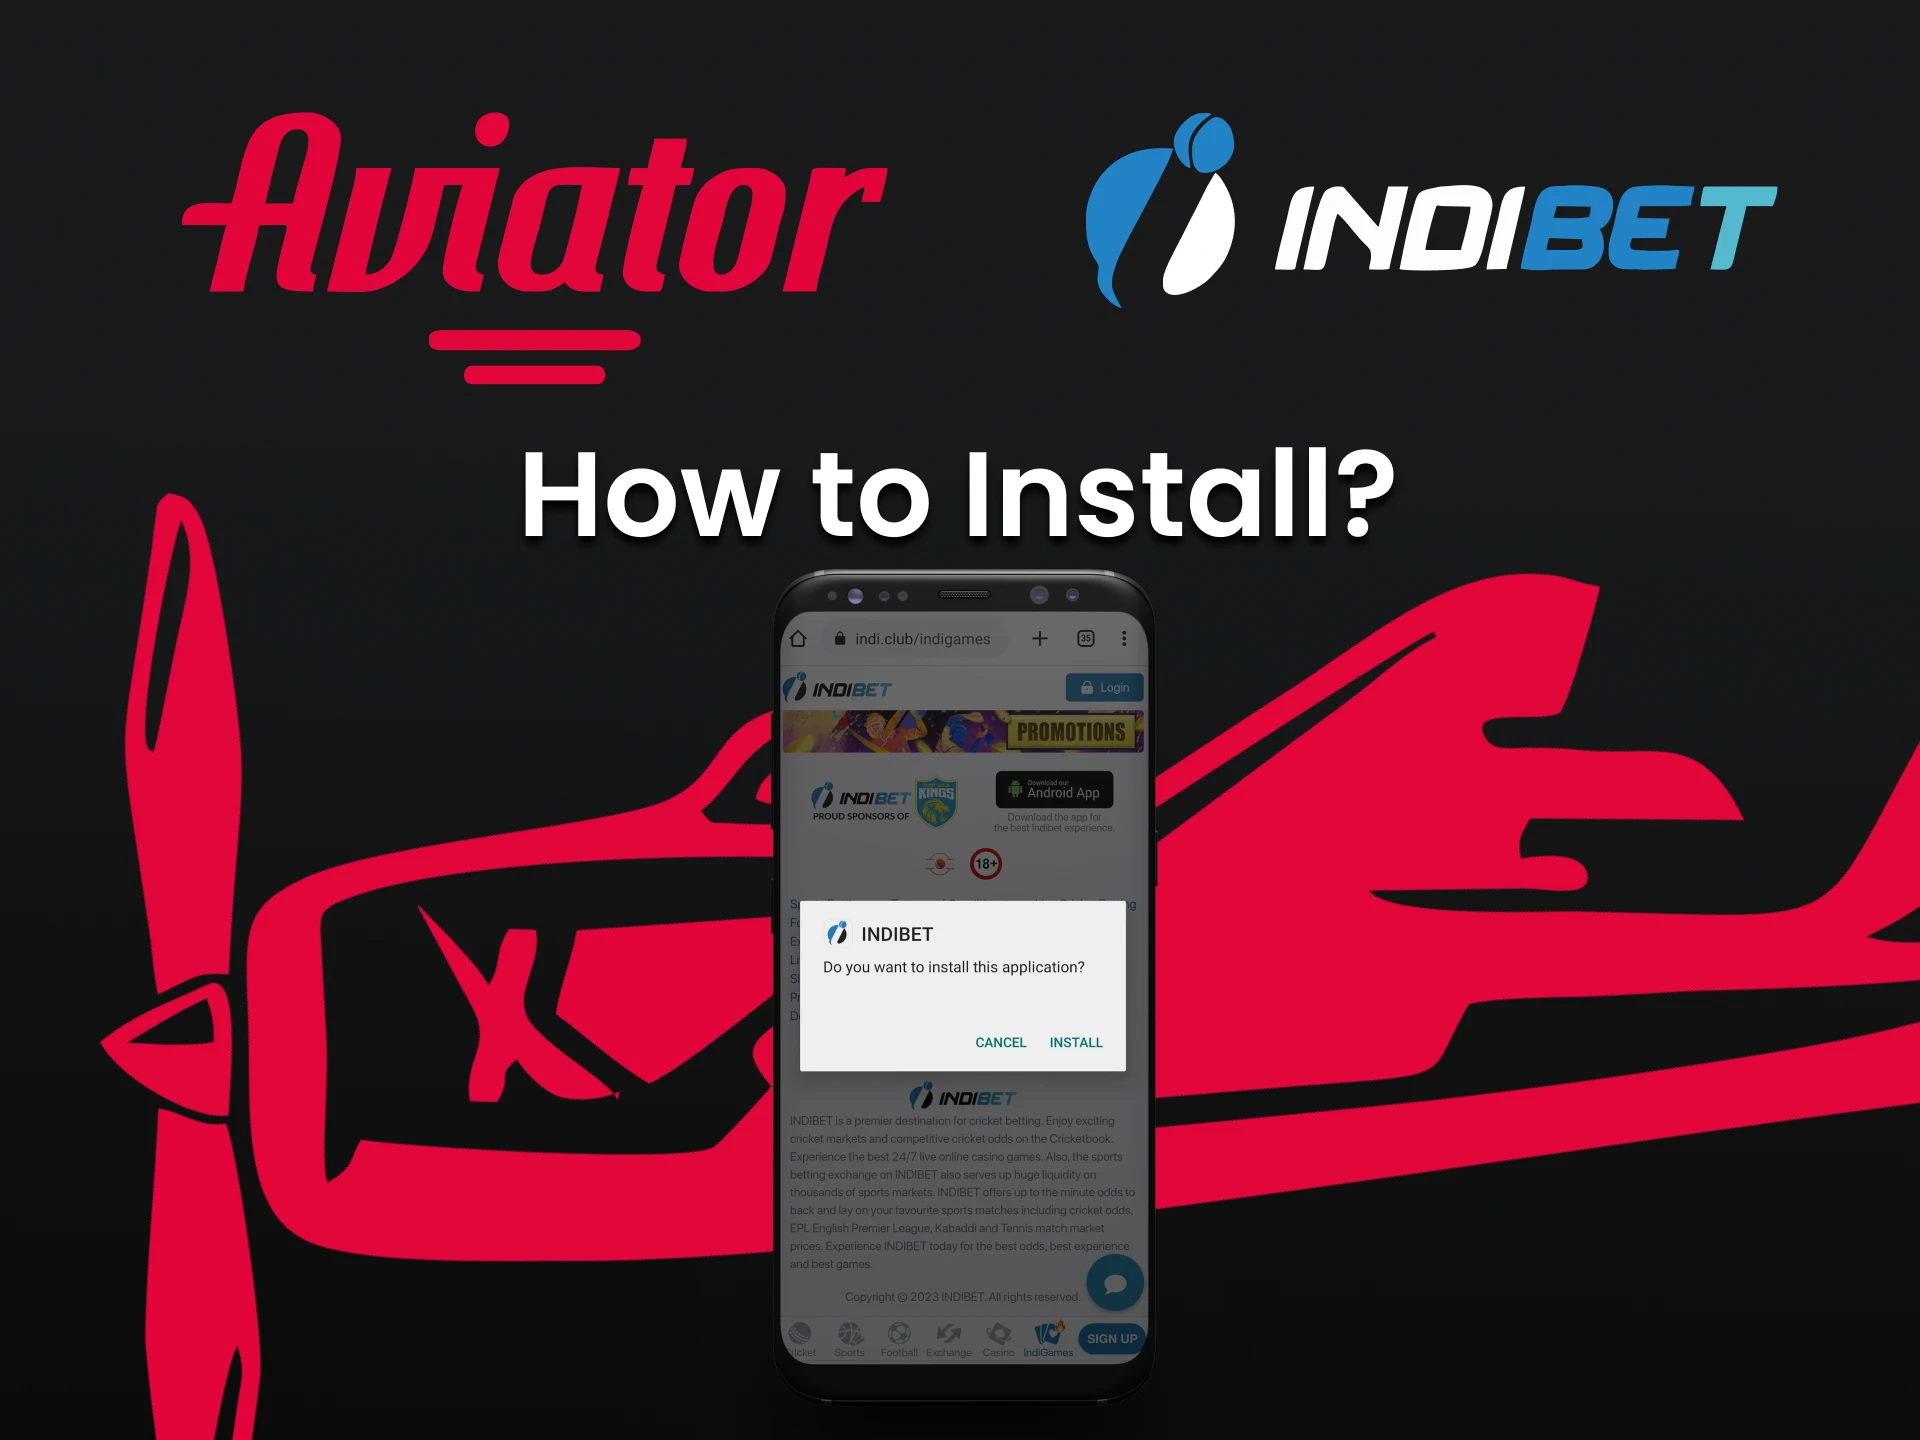 Learn how to install the Indibet app to play Aviator.